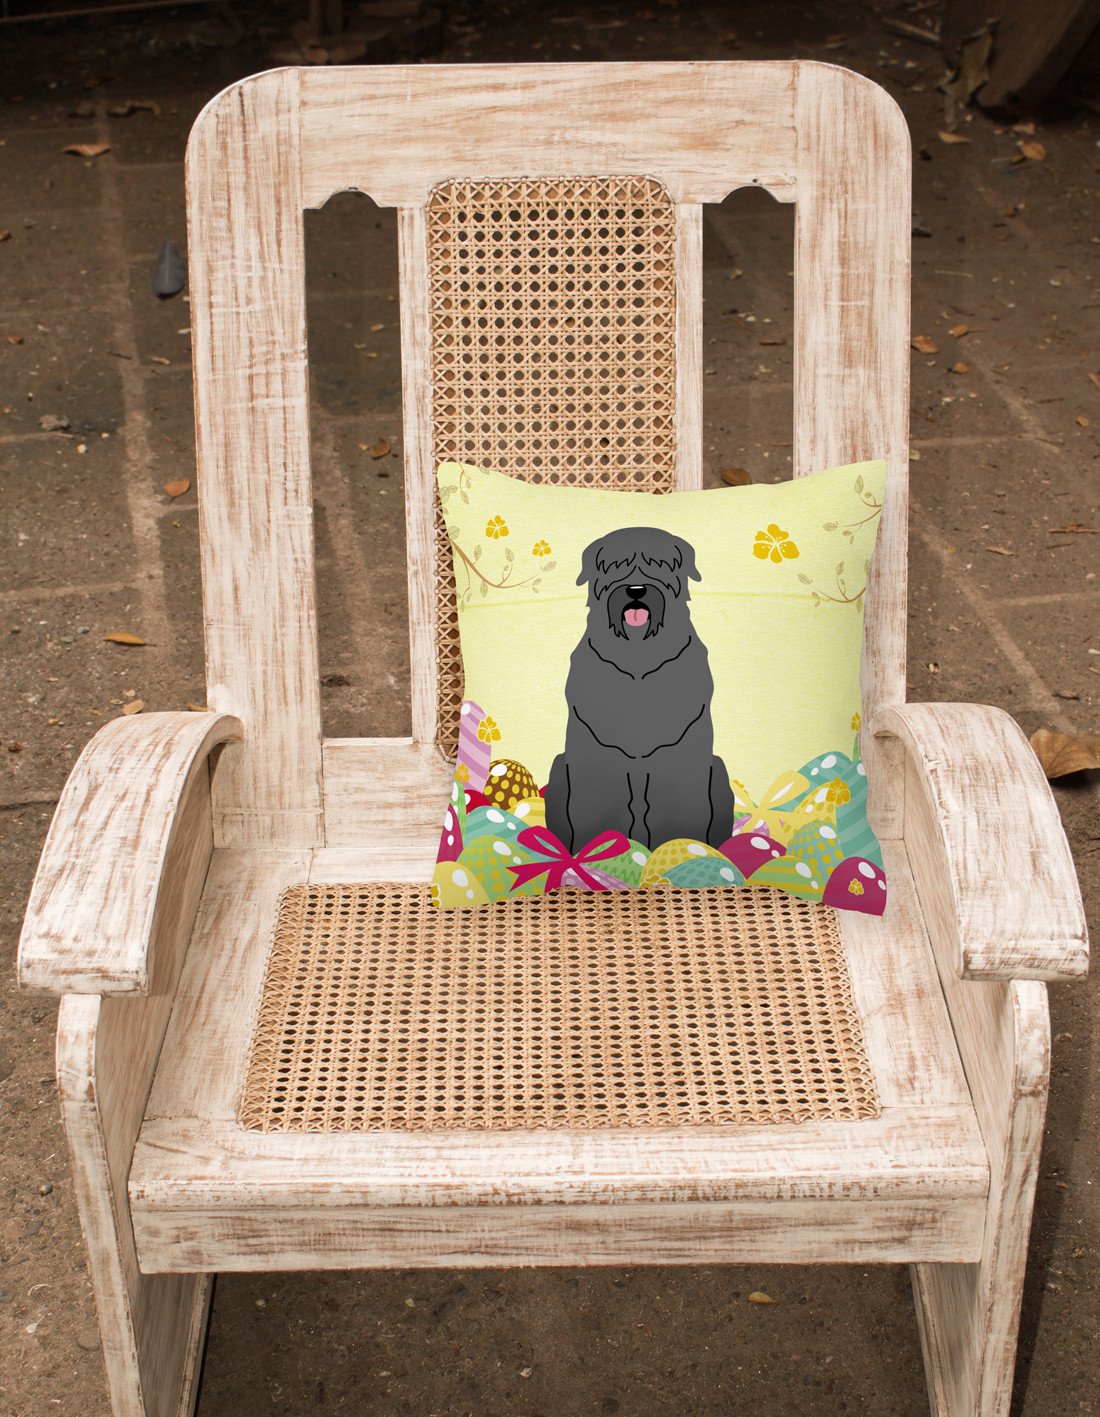 Easter Eggs Black Russian Terrier Fabric Decorative Pillow BB6026PW1818 by Caroline's Treasures